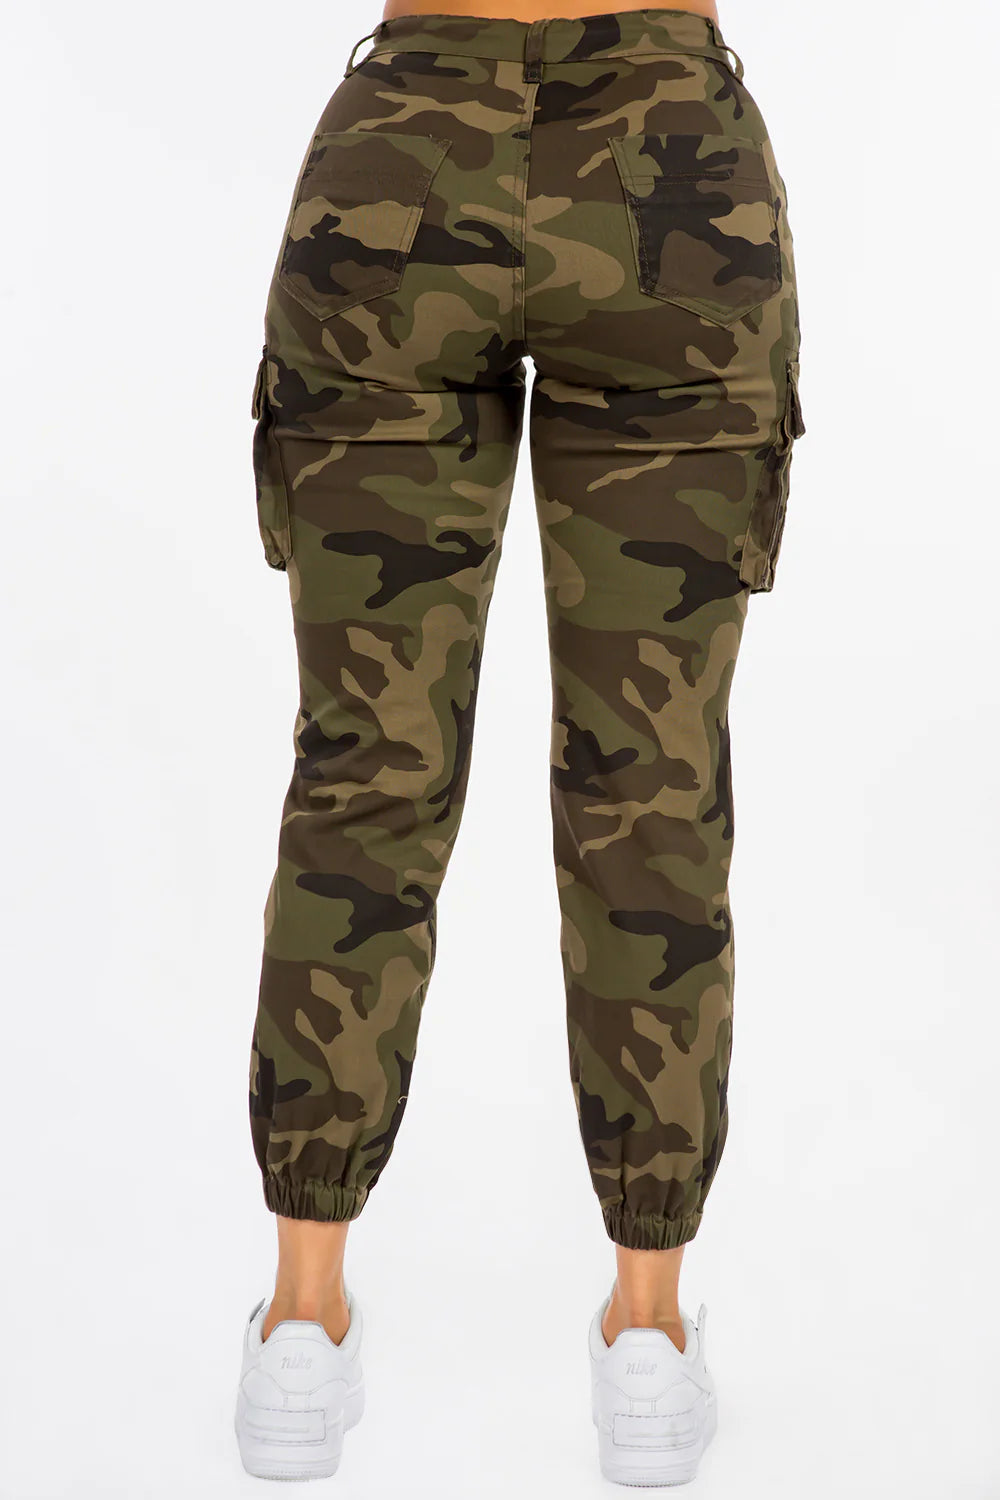 Women's Essential Basic Cropped Colored Cargo Joggers - Camo